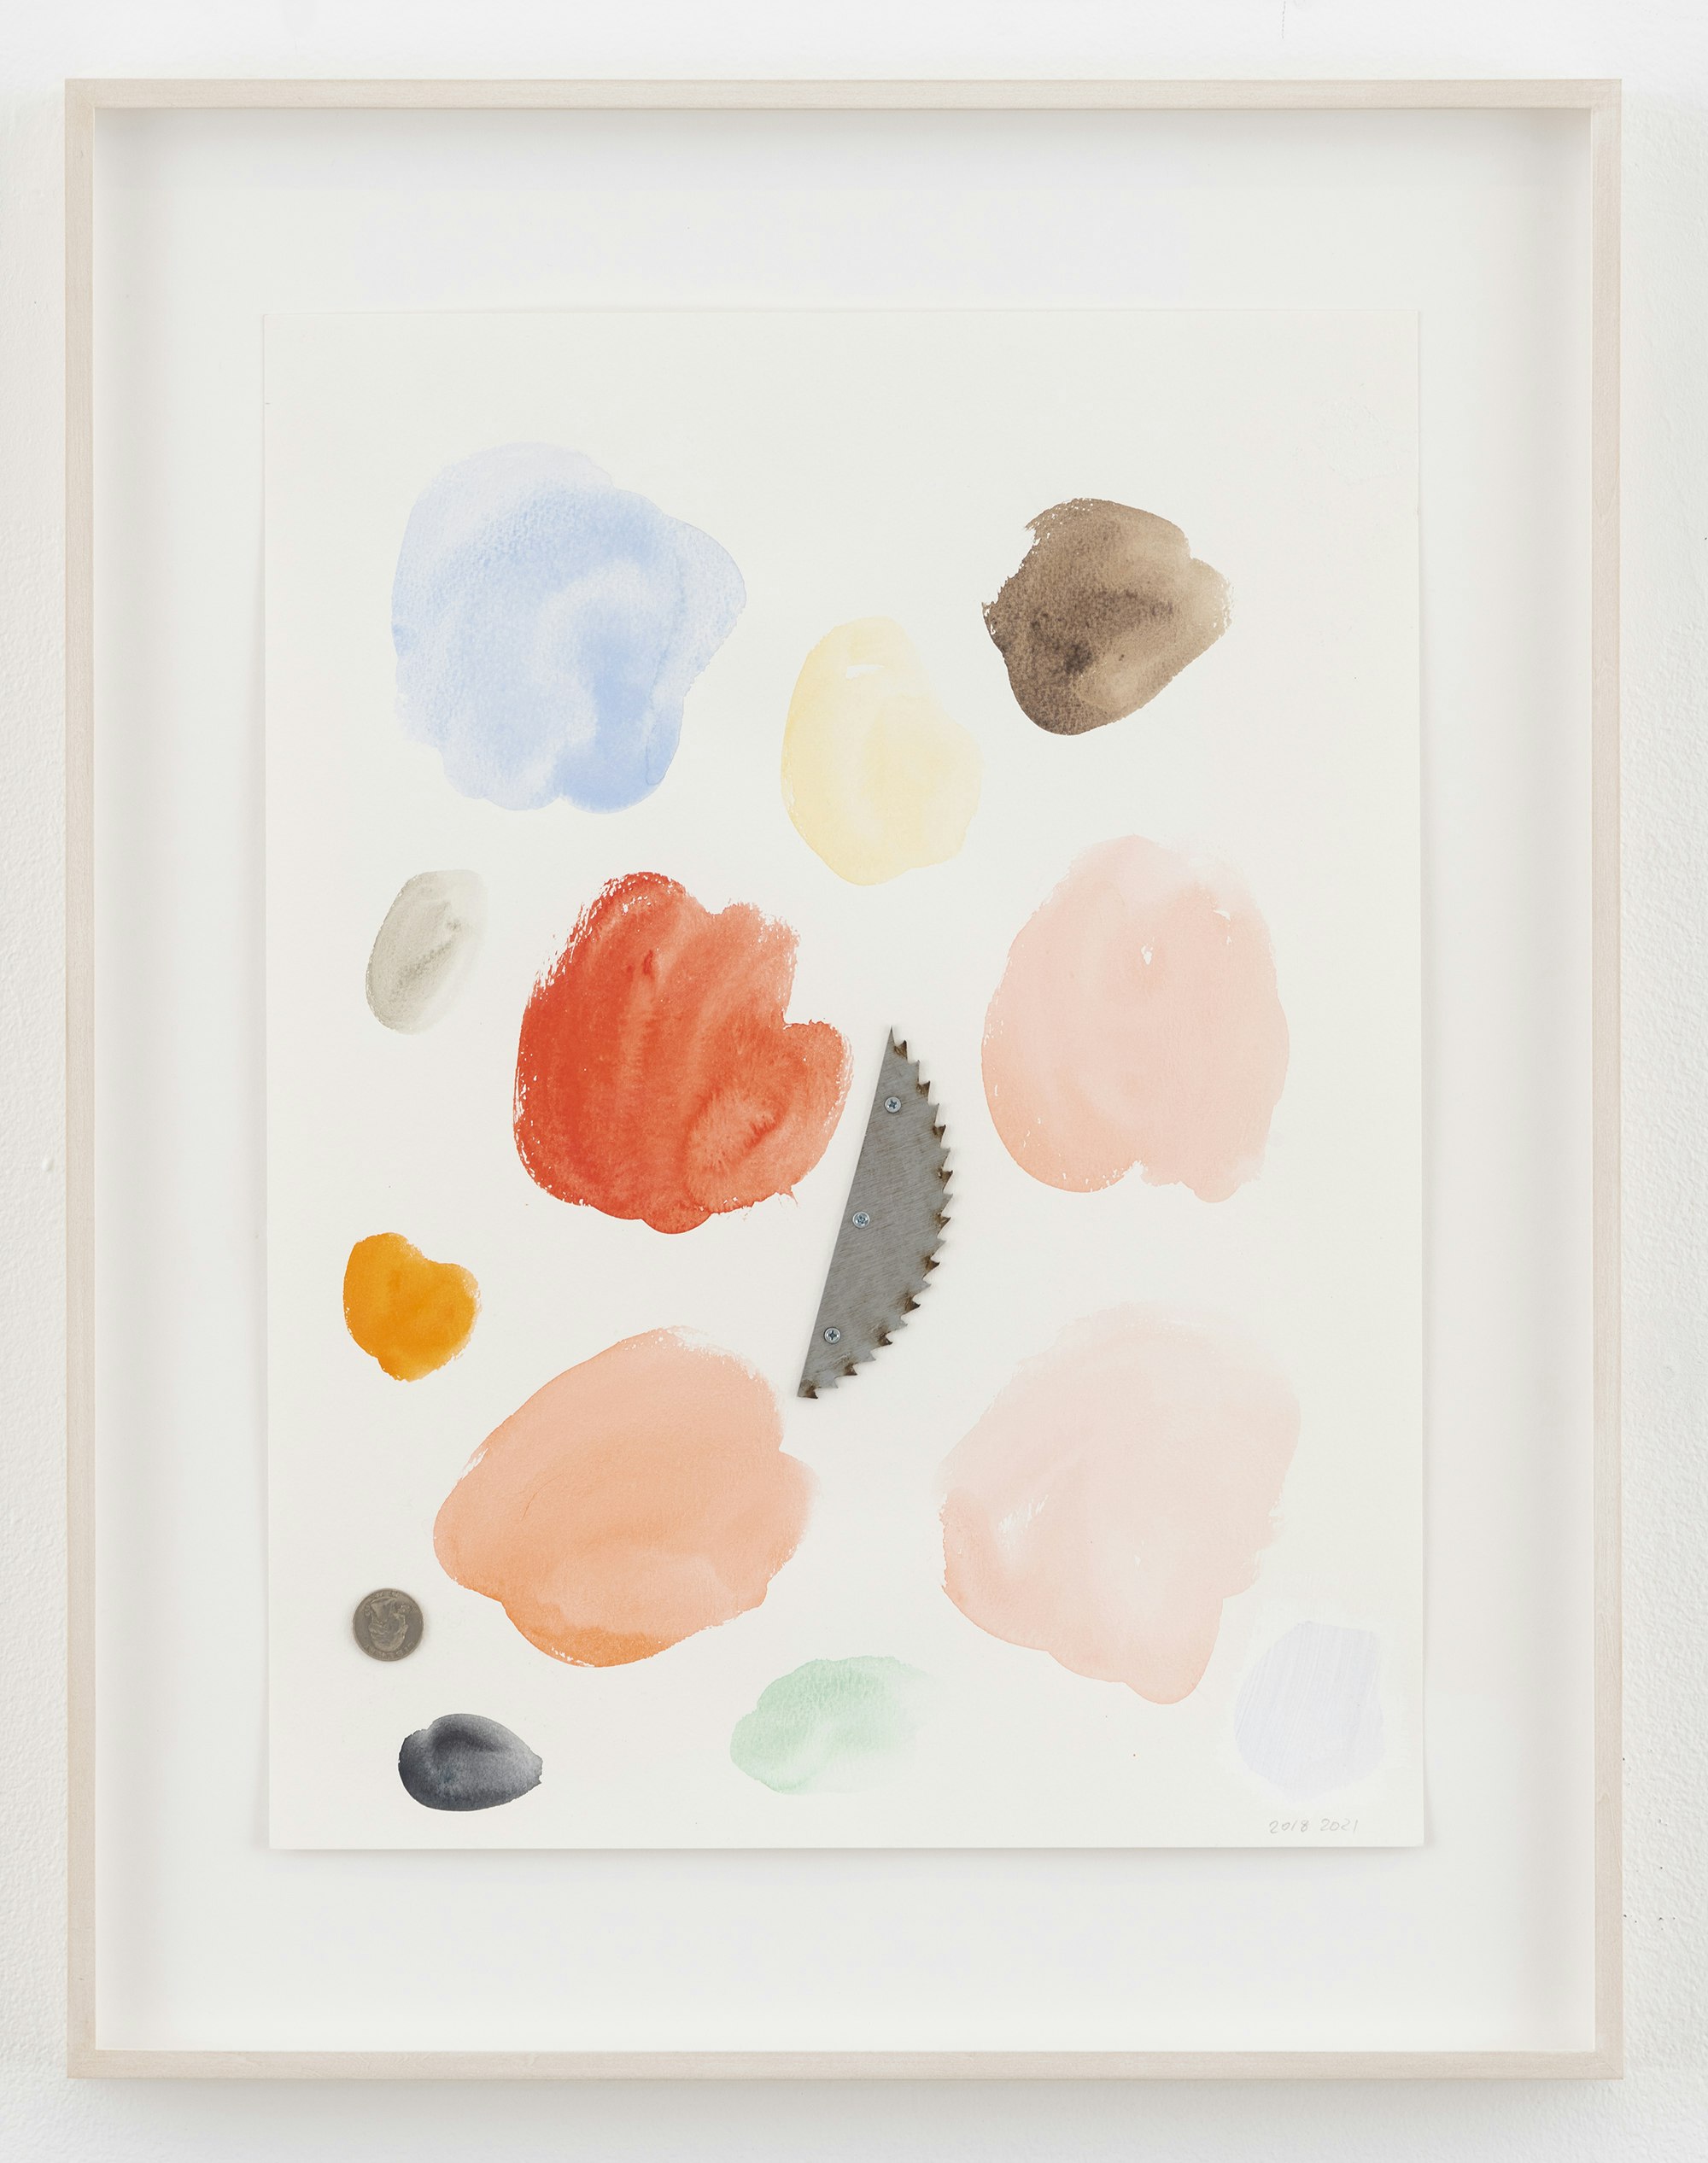 Monika Baer, <em>Loose change</em>, 2021. Watercolor, saw blade fragment, screws and coin on paper, 20 x 15 inches. Courtesy the artist; Galerie Barbara Weiss, Berlin; and Greene Naftali, New York.